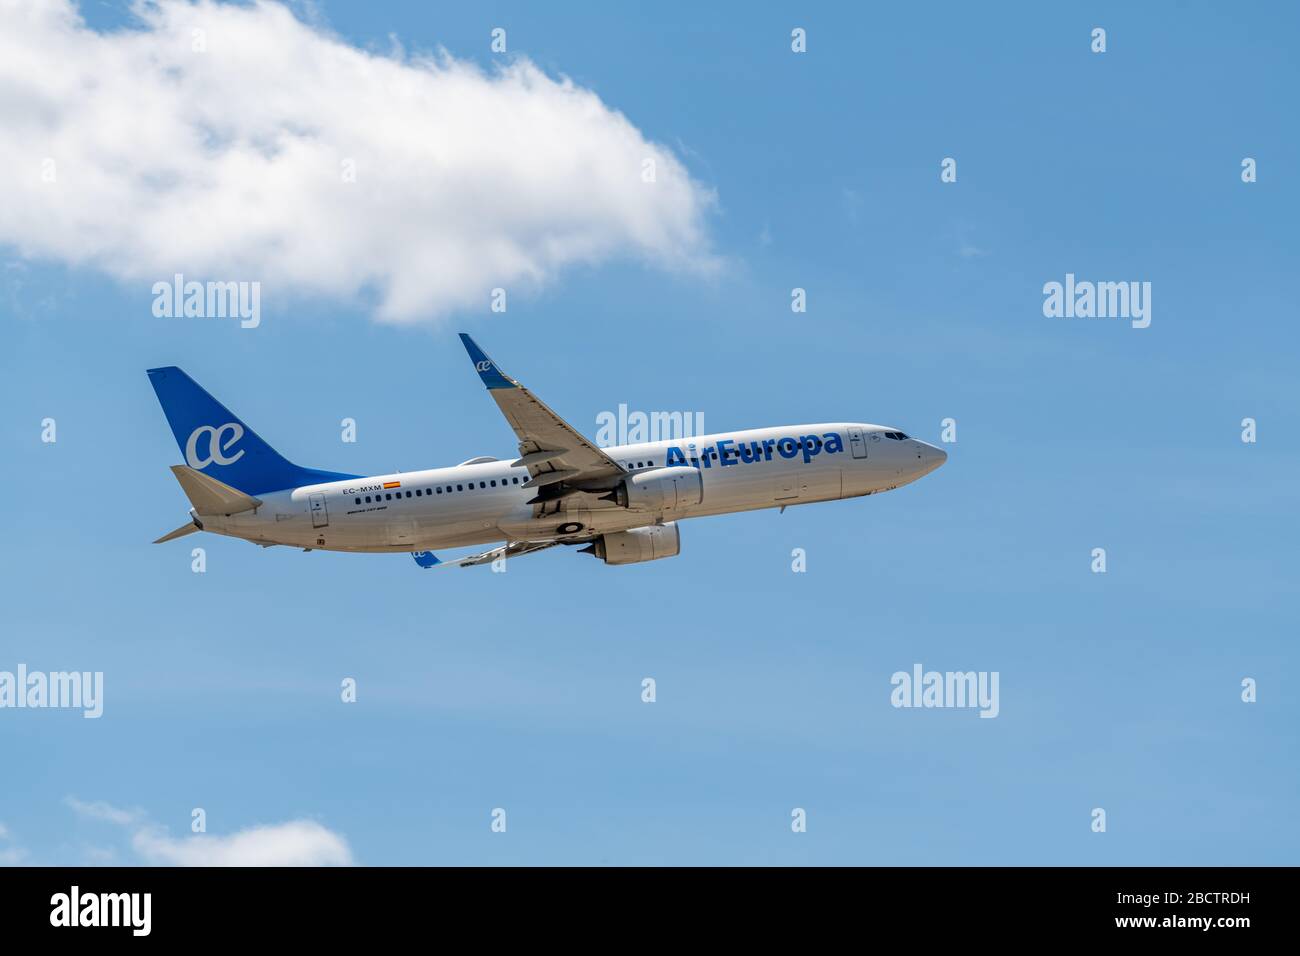 MADRID, SPAIN - APRIL 14, 2019: Air Europa airlines Boeing 737 NG / Max passenger plane taking off from Madrid-Barajas International Airport Adolfo Su Stock Photo